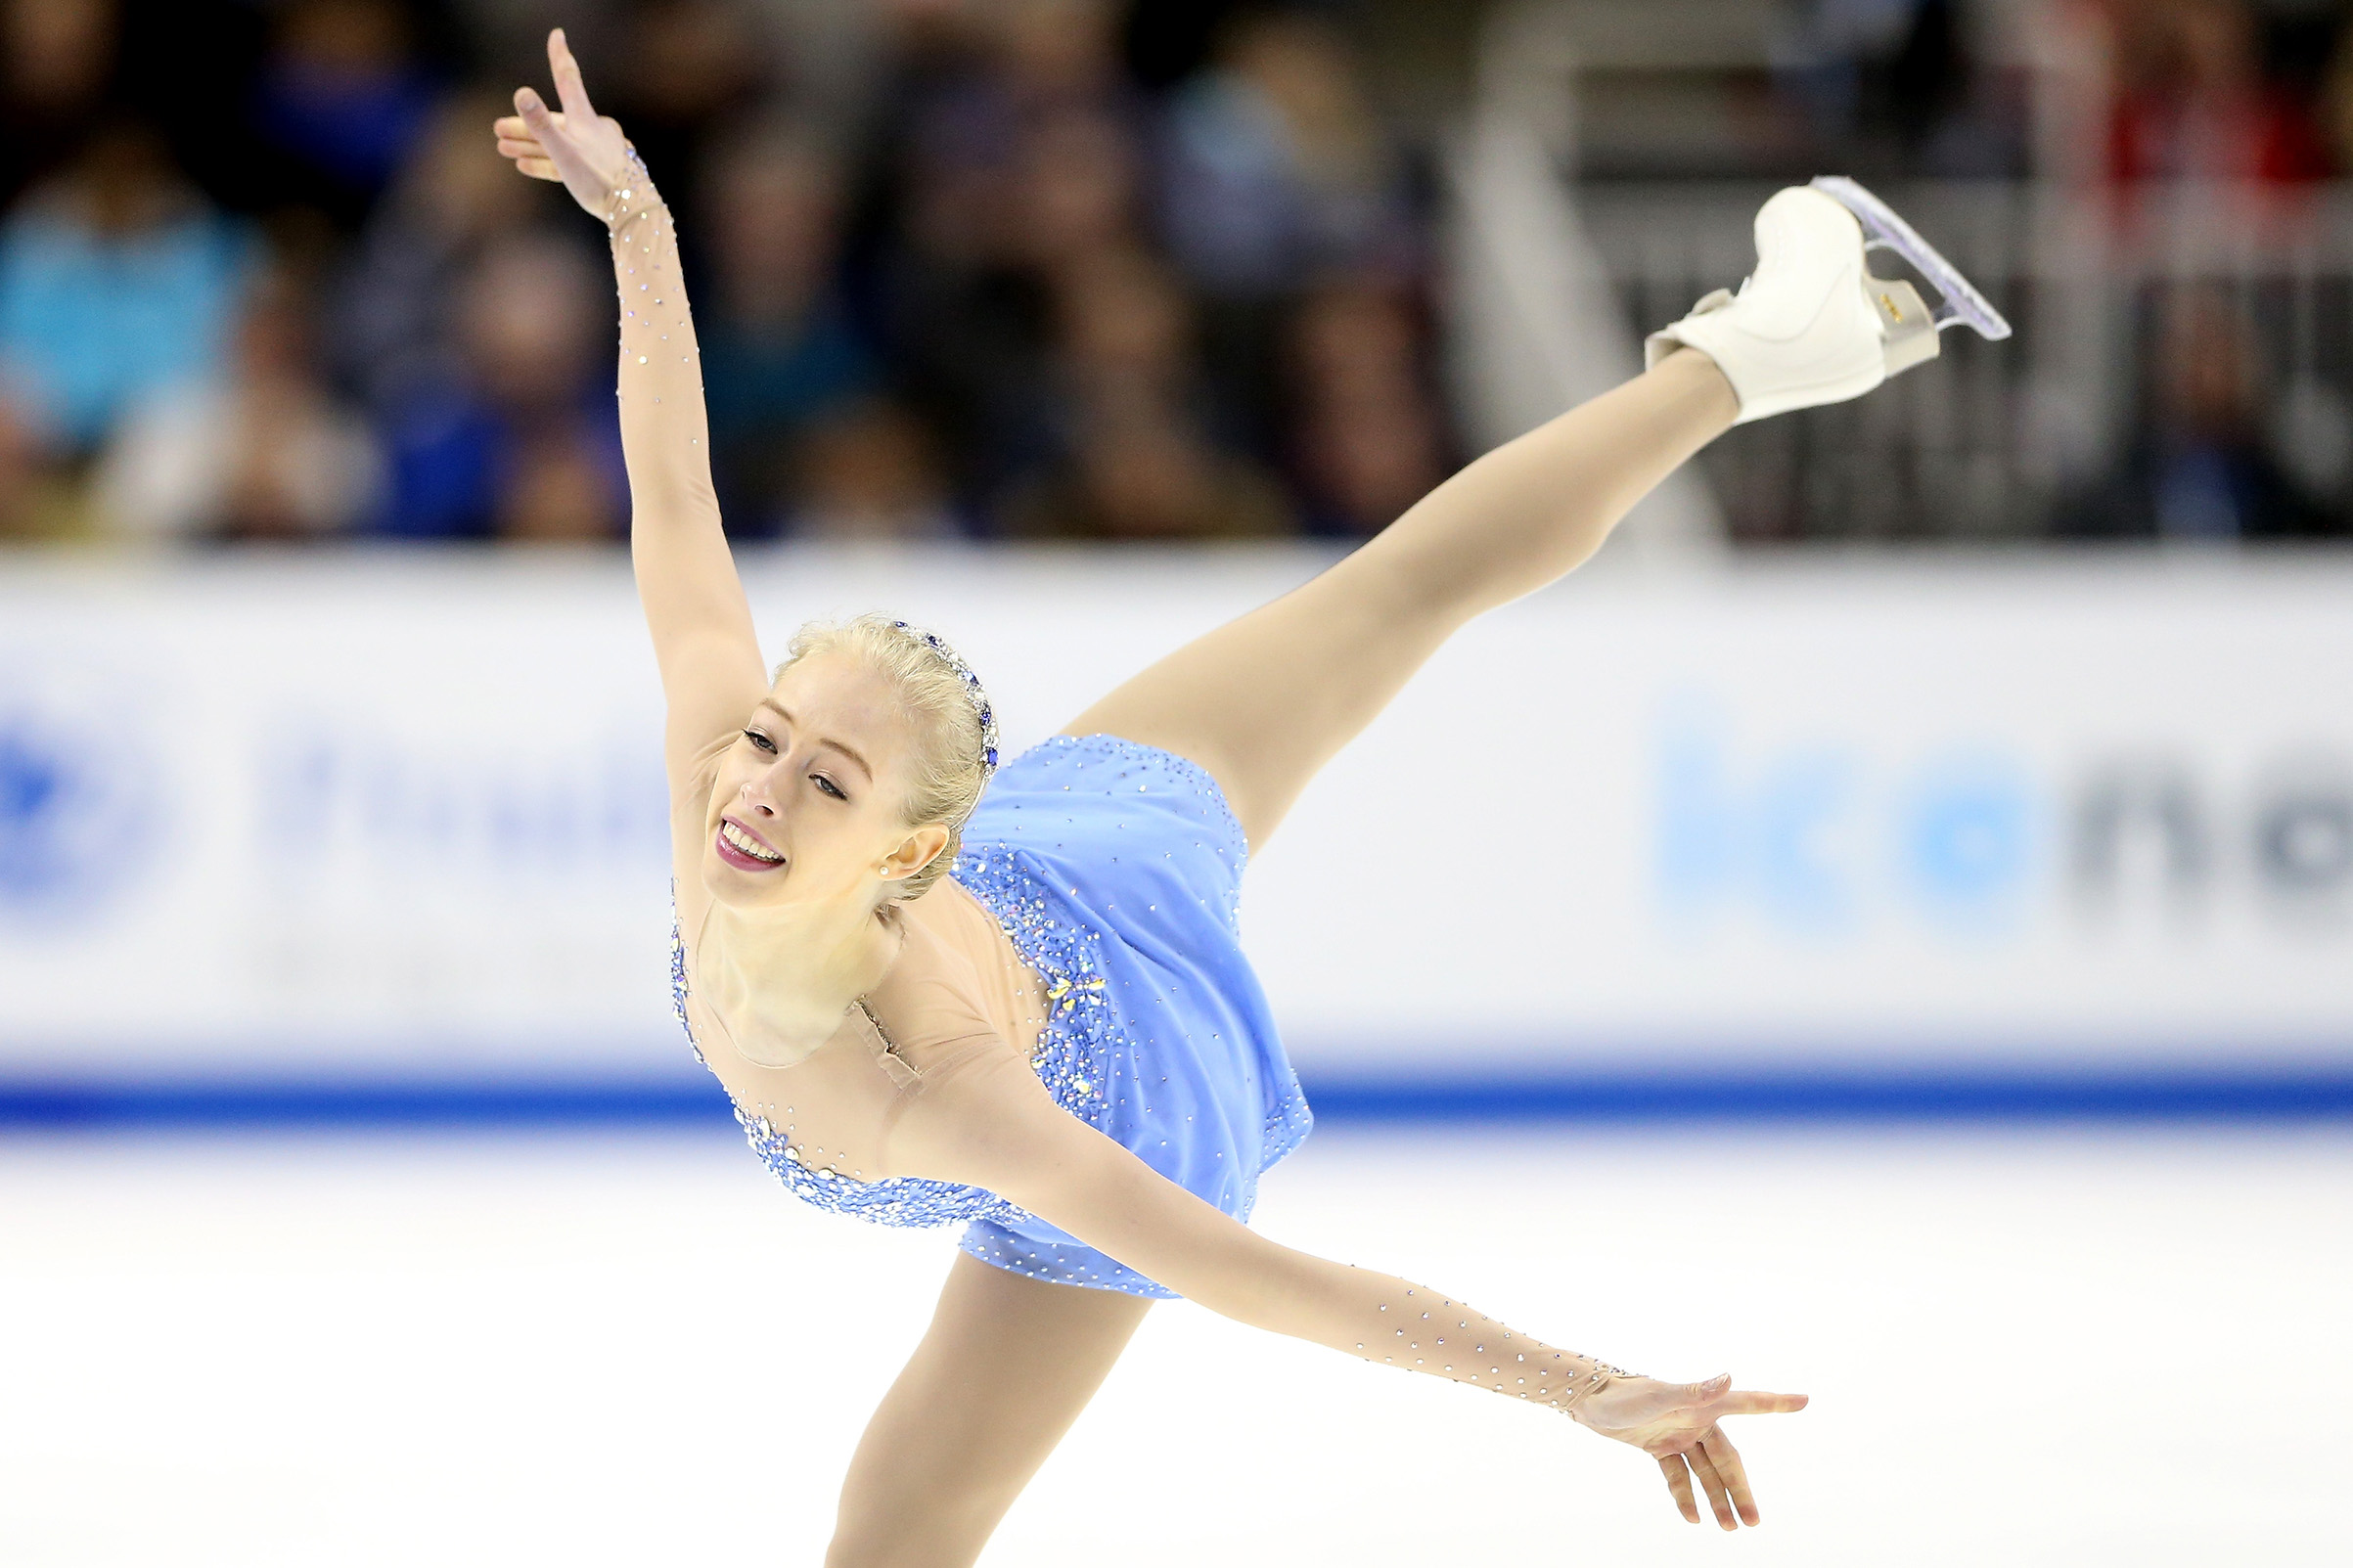 Olympic athlete Bradie Tennell competes in the Ladies Free Skate during the 2018 Prudential U.S. Figure Skating Championships at the SAP Center in San Jose, Calif. on January 5, 2018. Matthew Stockman—Getty Images (Matthew Stockman—Getty Images)